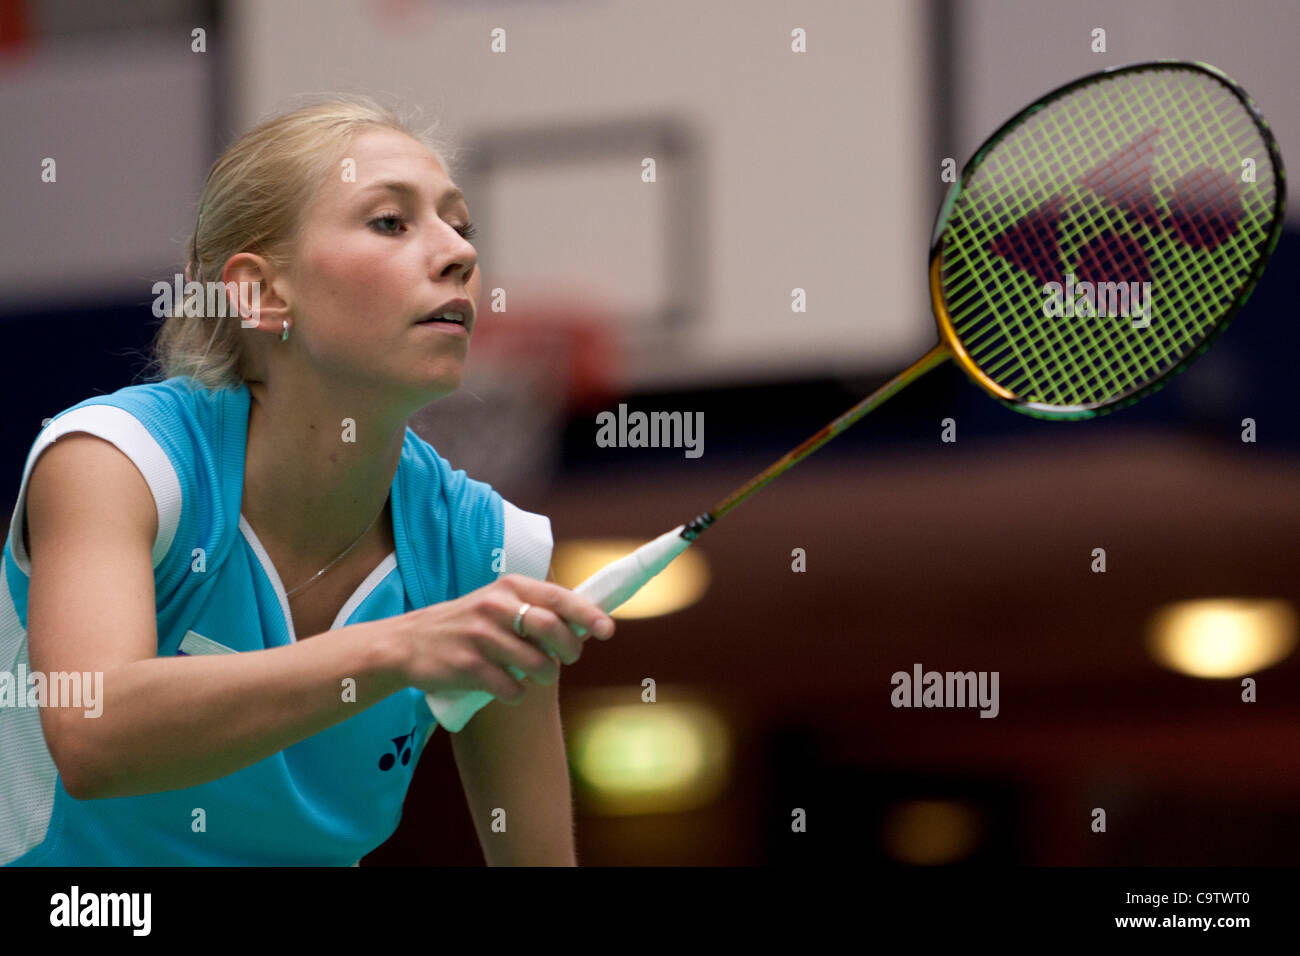 AMSTERDAM, THE NETHERLANDS, 19/02/2012. Badminton player Anastasia Prokopenko (Russia, pictured) loses her match against Judith Meulendijks (the Netherlands) in the finals of the European Team Championships Badminton 2012 in Amsterdam. Stock Photo